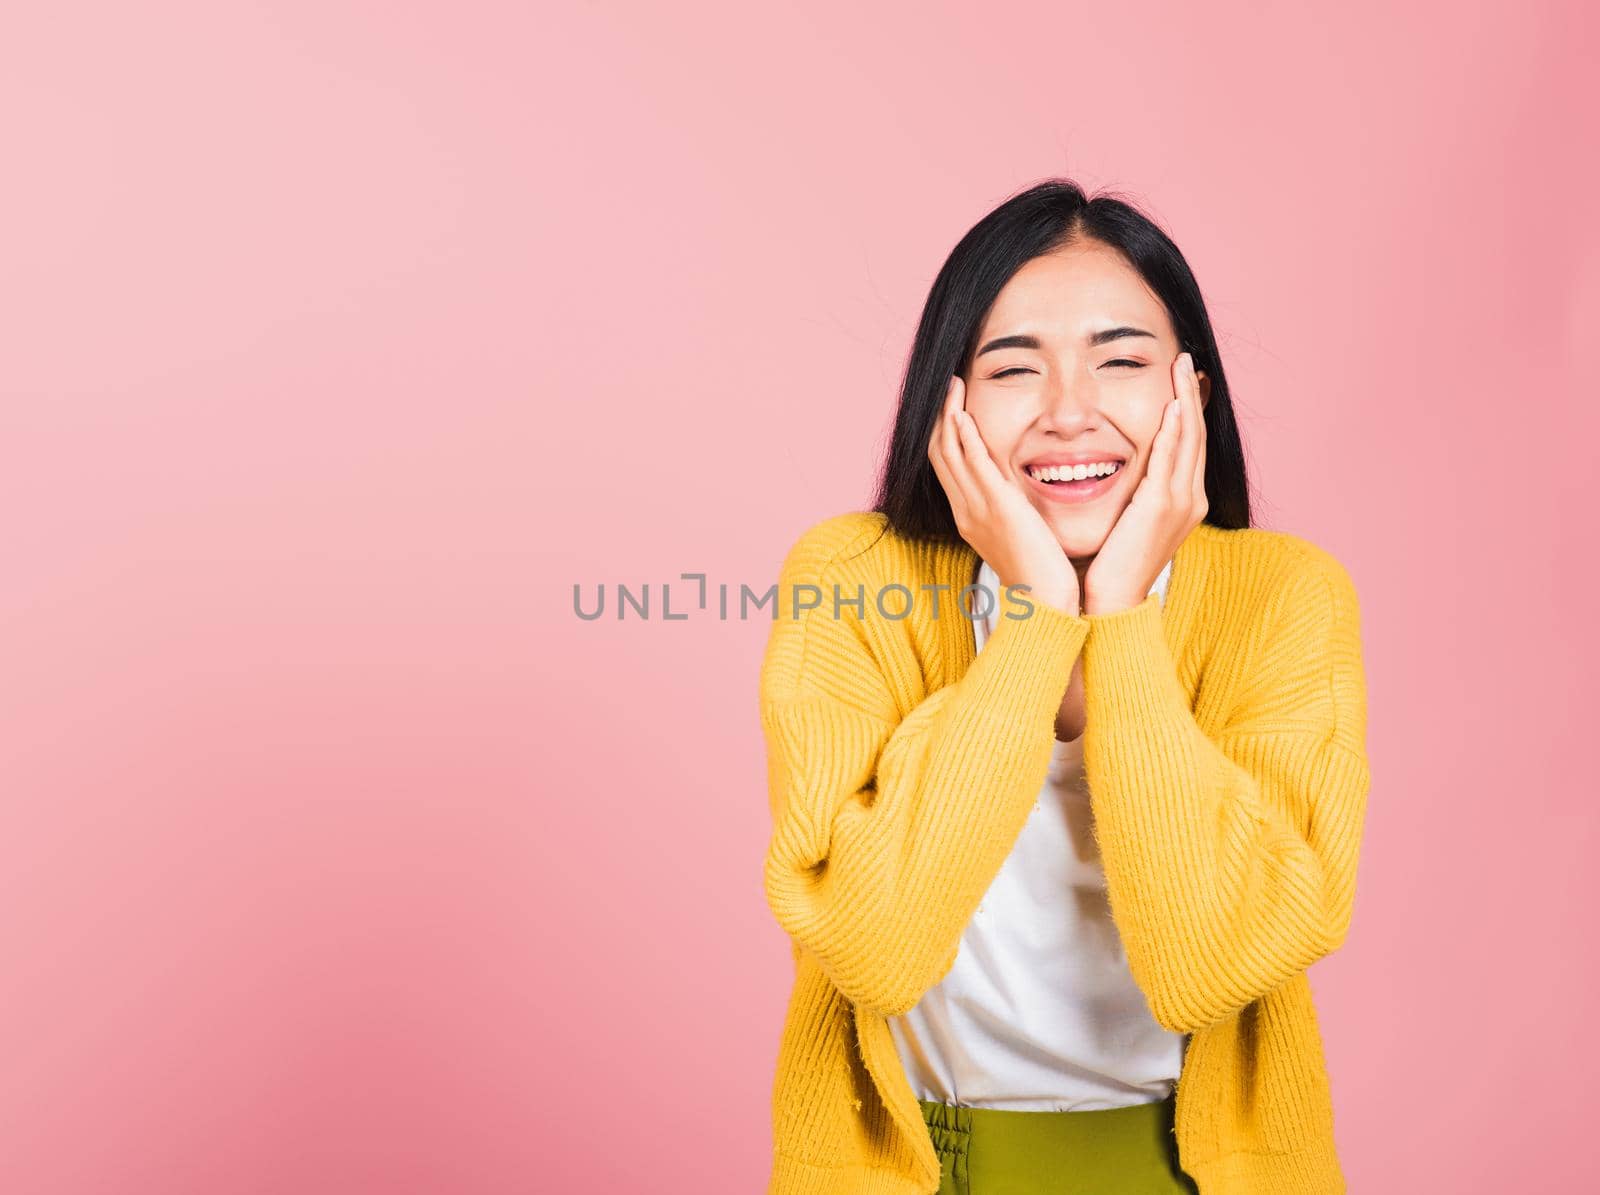 Happy Asian portrait beautiful cute young woman smile holding her cheeks looking to camera studio shot isolated on pink background Thai female beauty face touch massage healthy skin with copy space